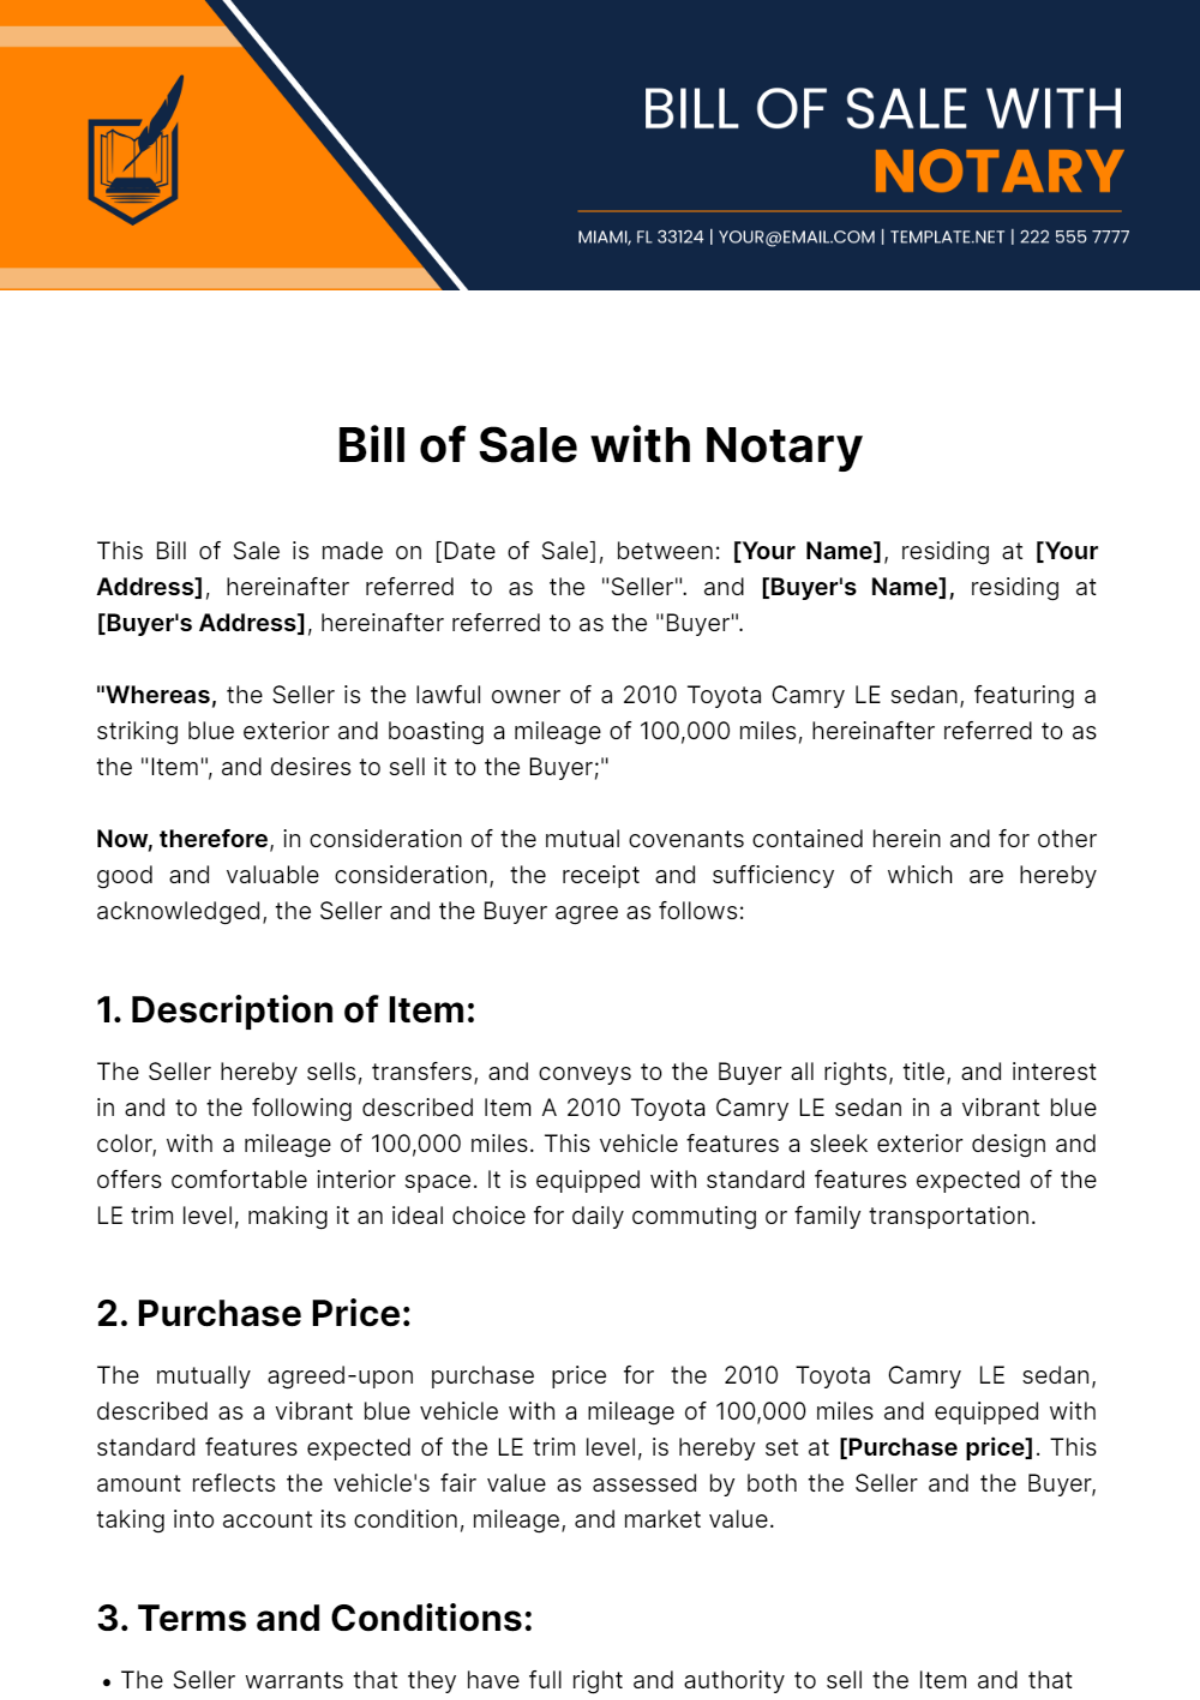 Bill of Sale with Notary Template